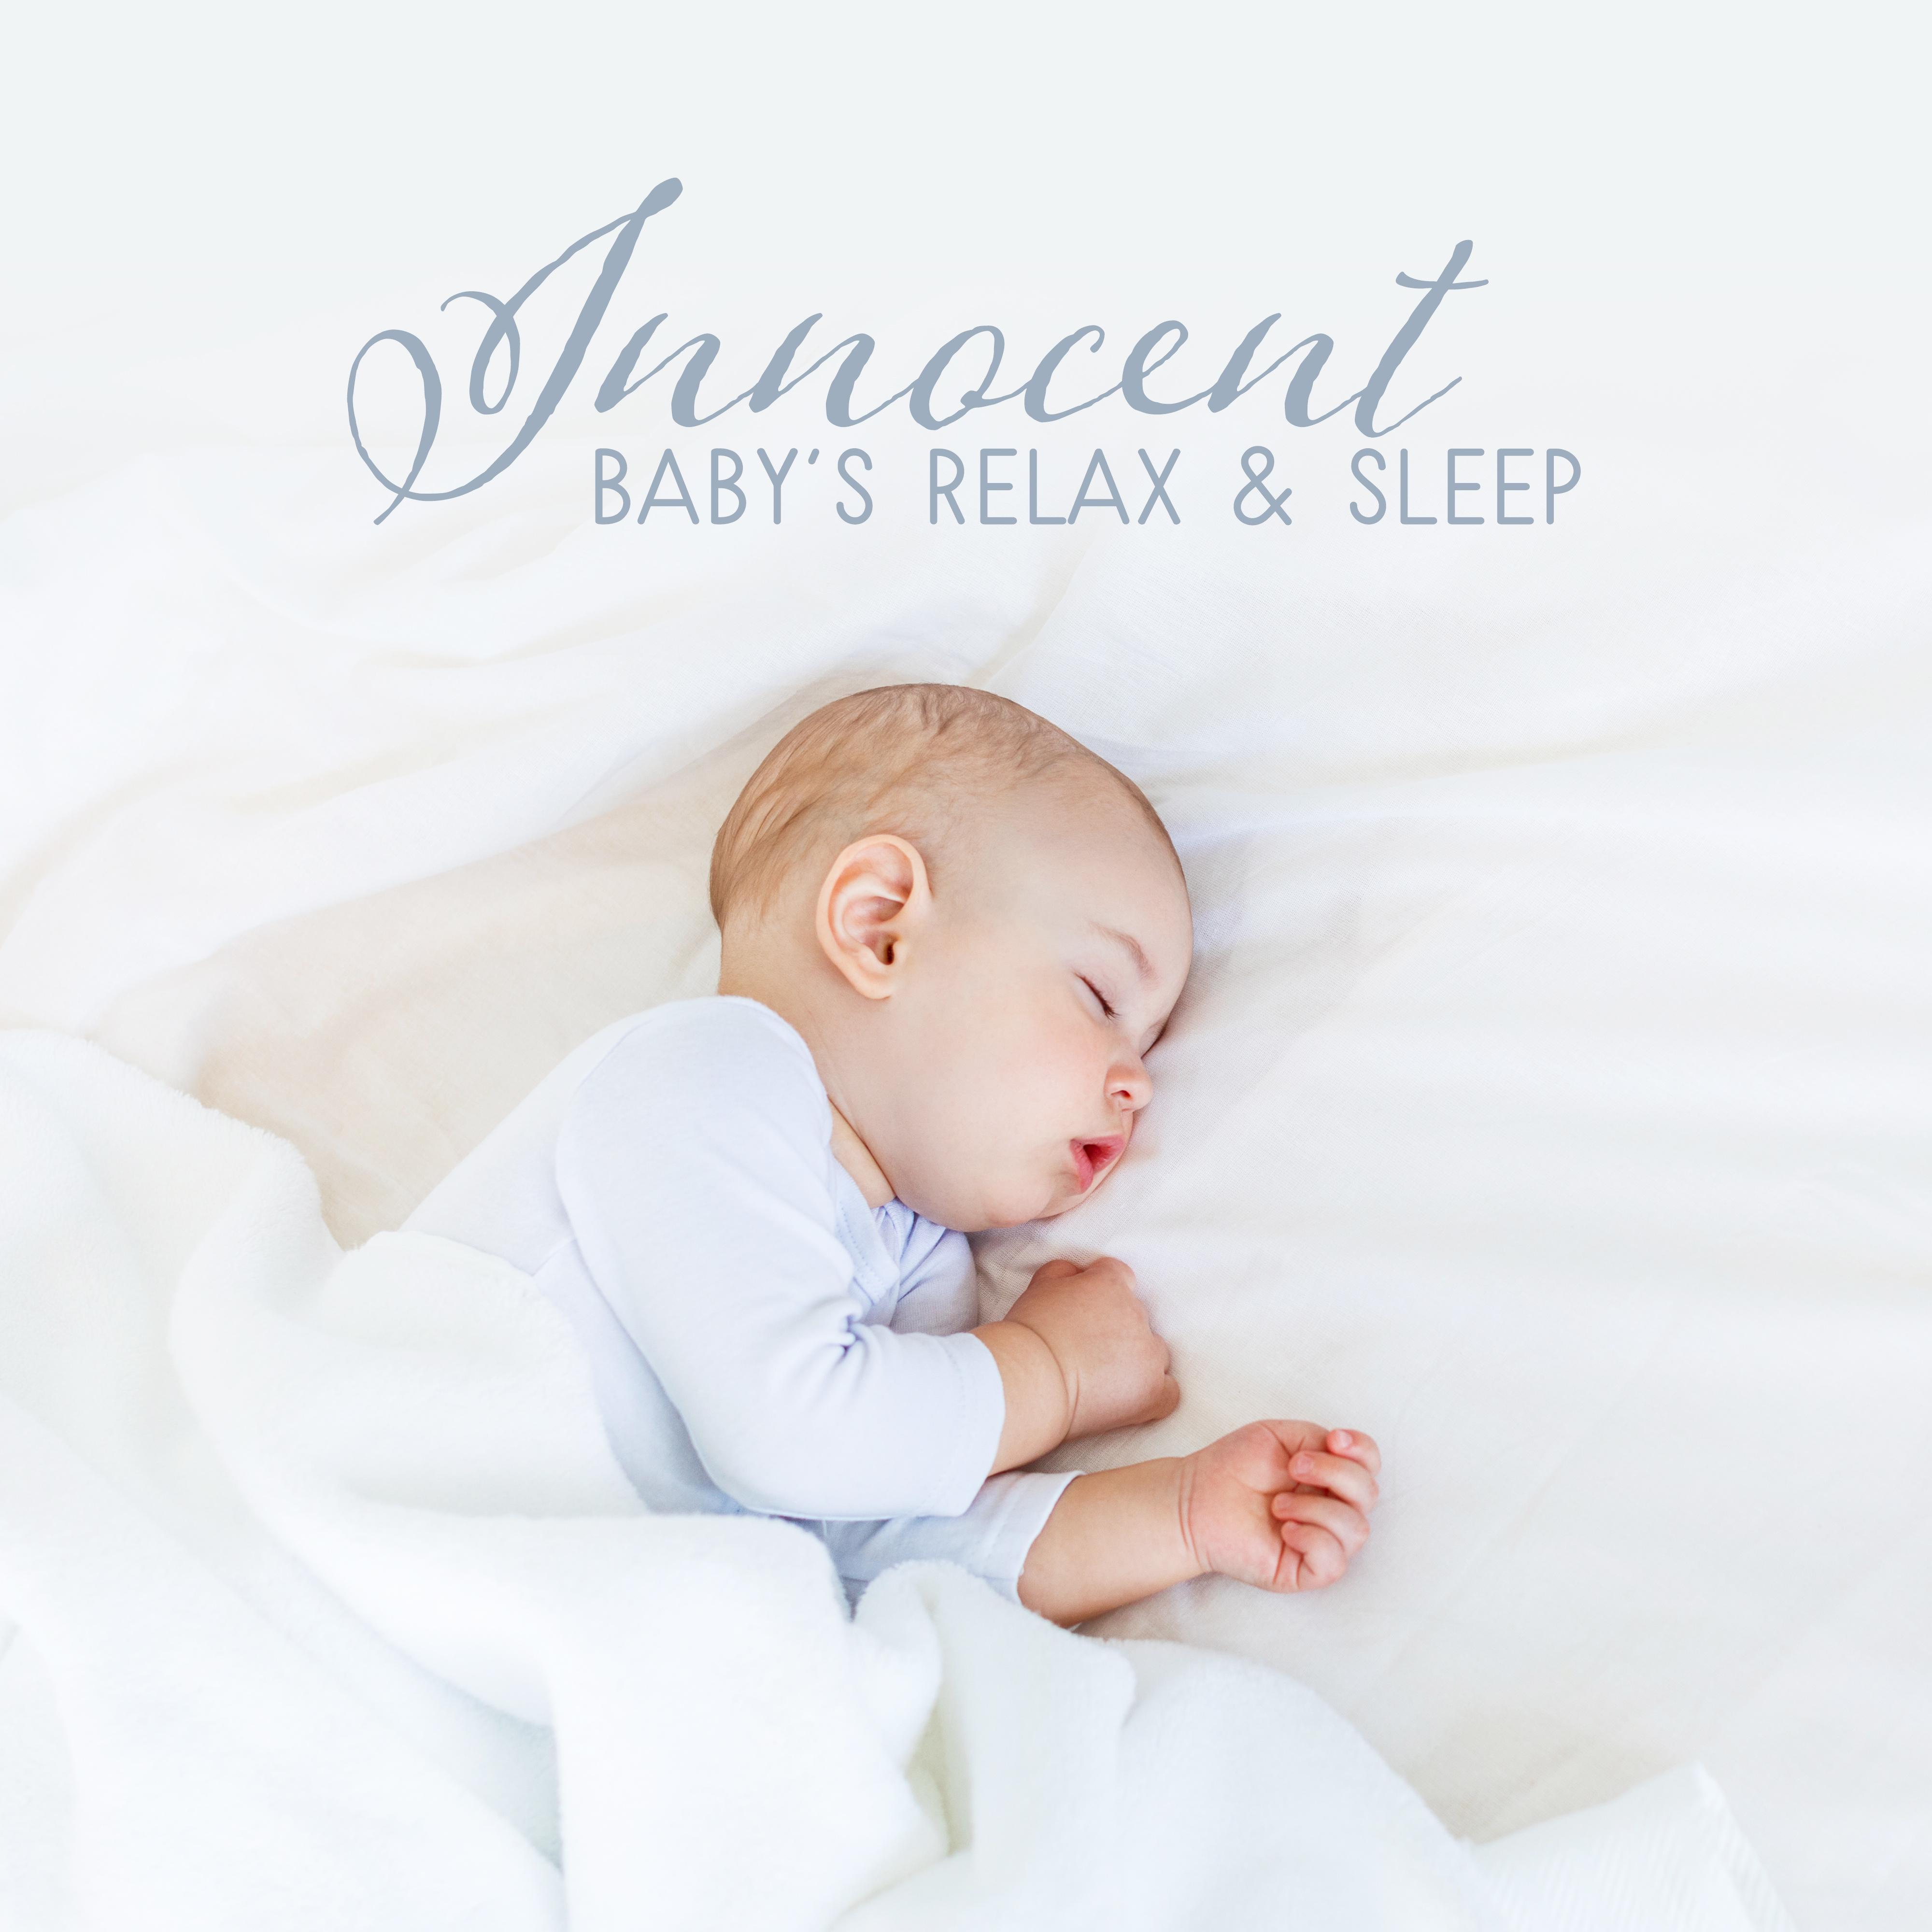 Innocent Baby’s Relax & Sleep: 2019 Soft New Age Music for Best Sleep Experience, Calming Down, Rest & Relax